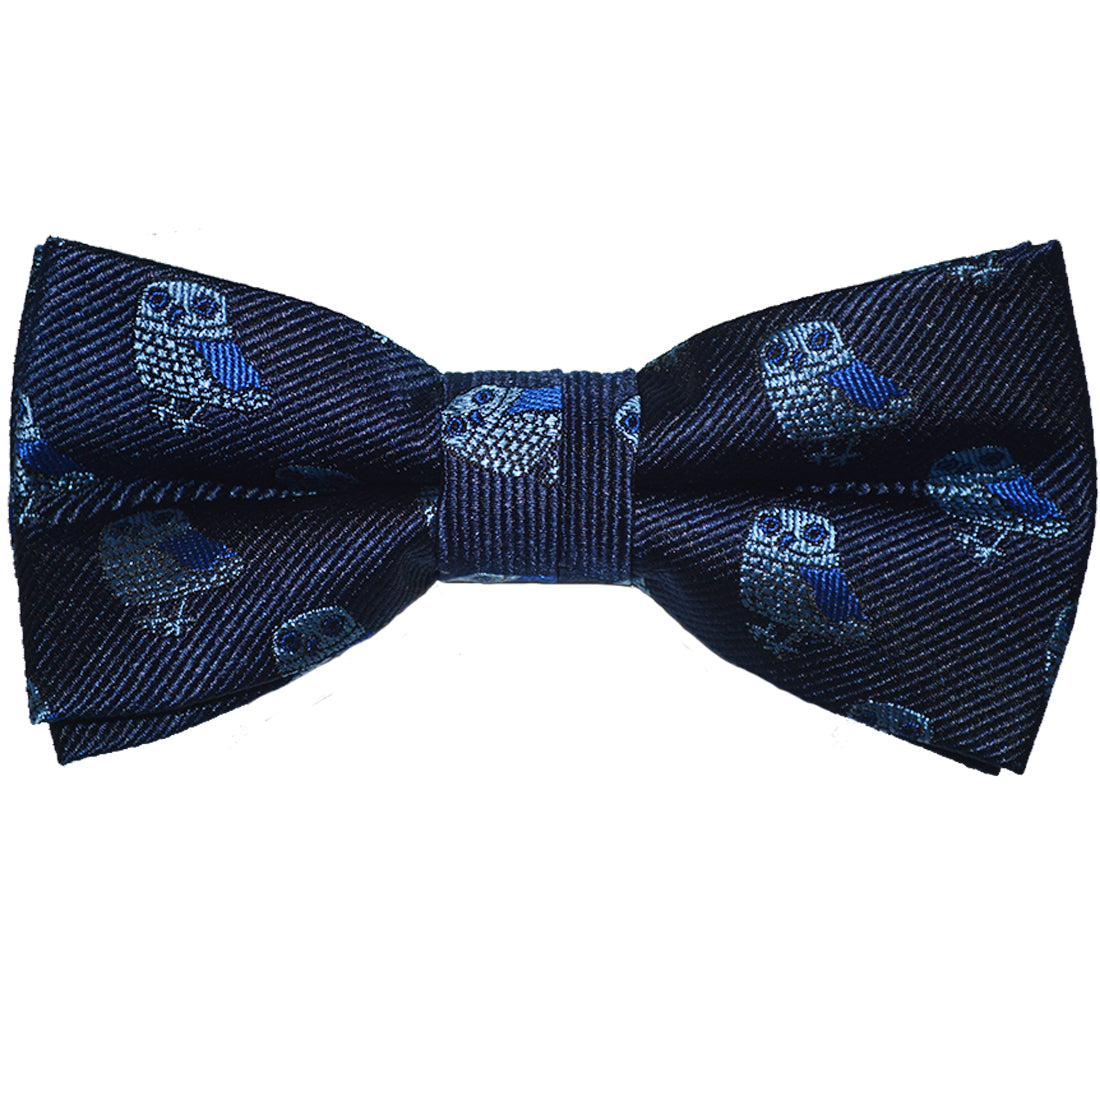 Owl Bow Tie - Blue on Navy, Woven Silk, Pre-Tied for Kids - SummerTies